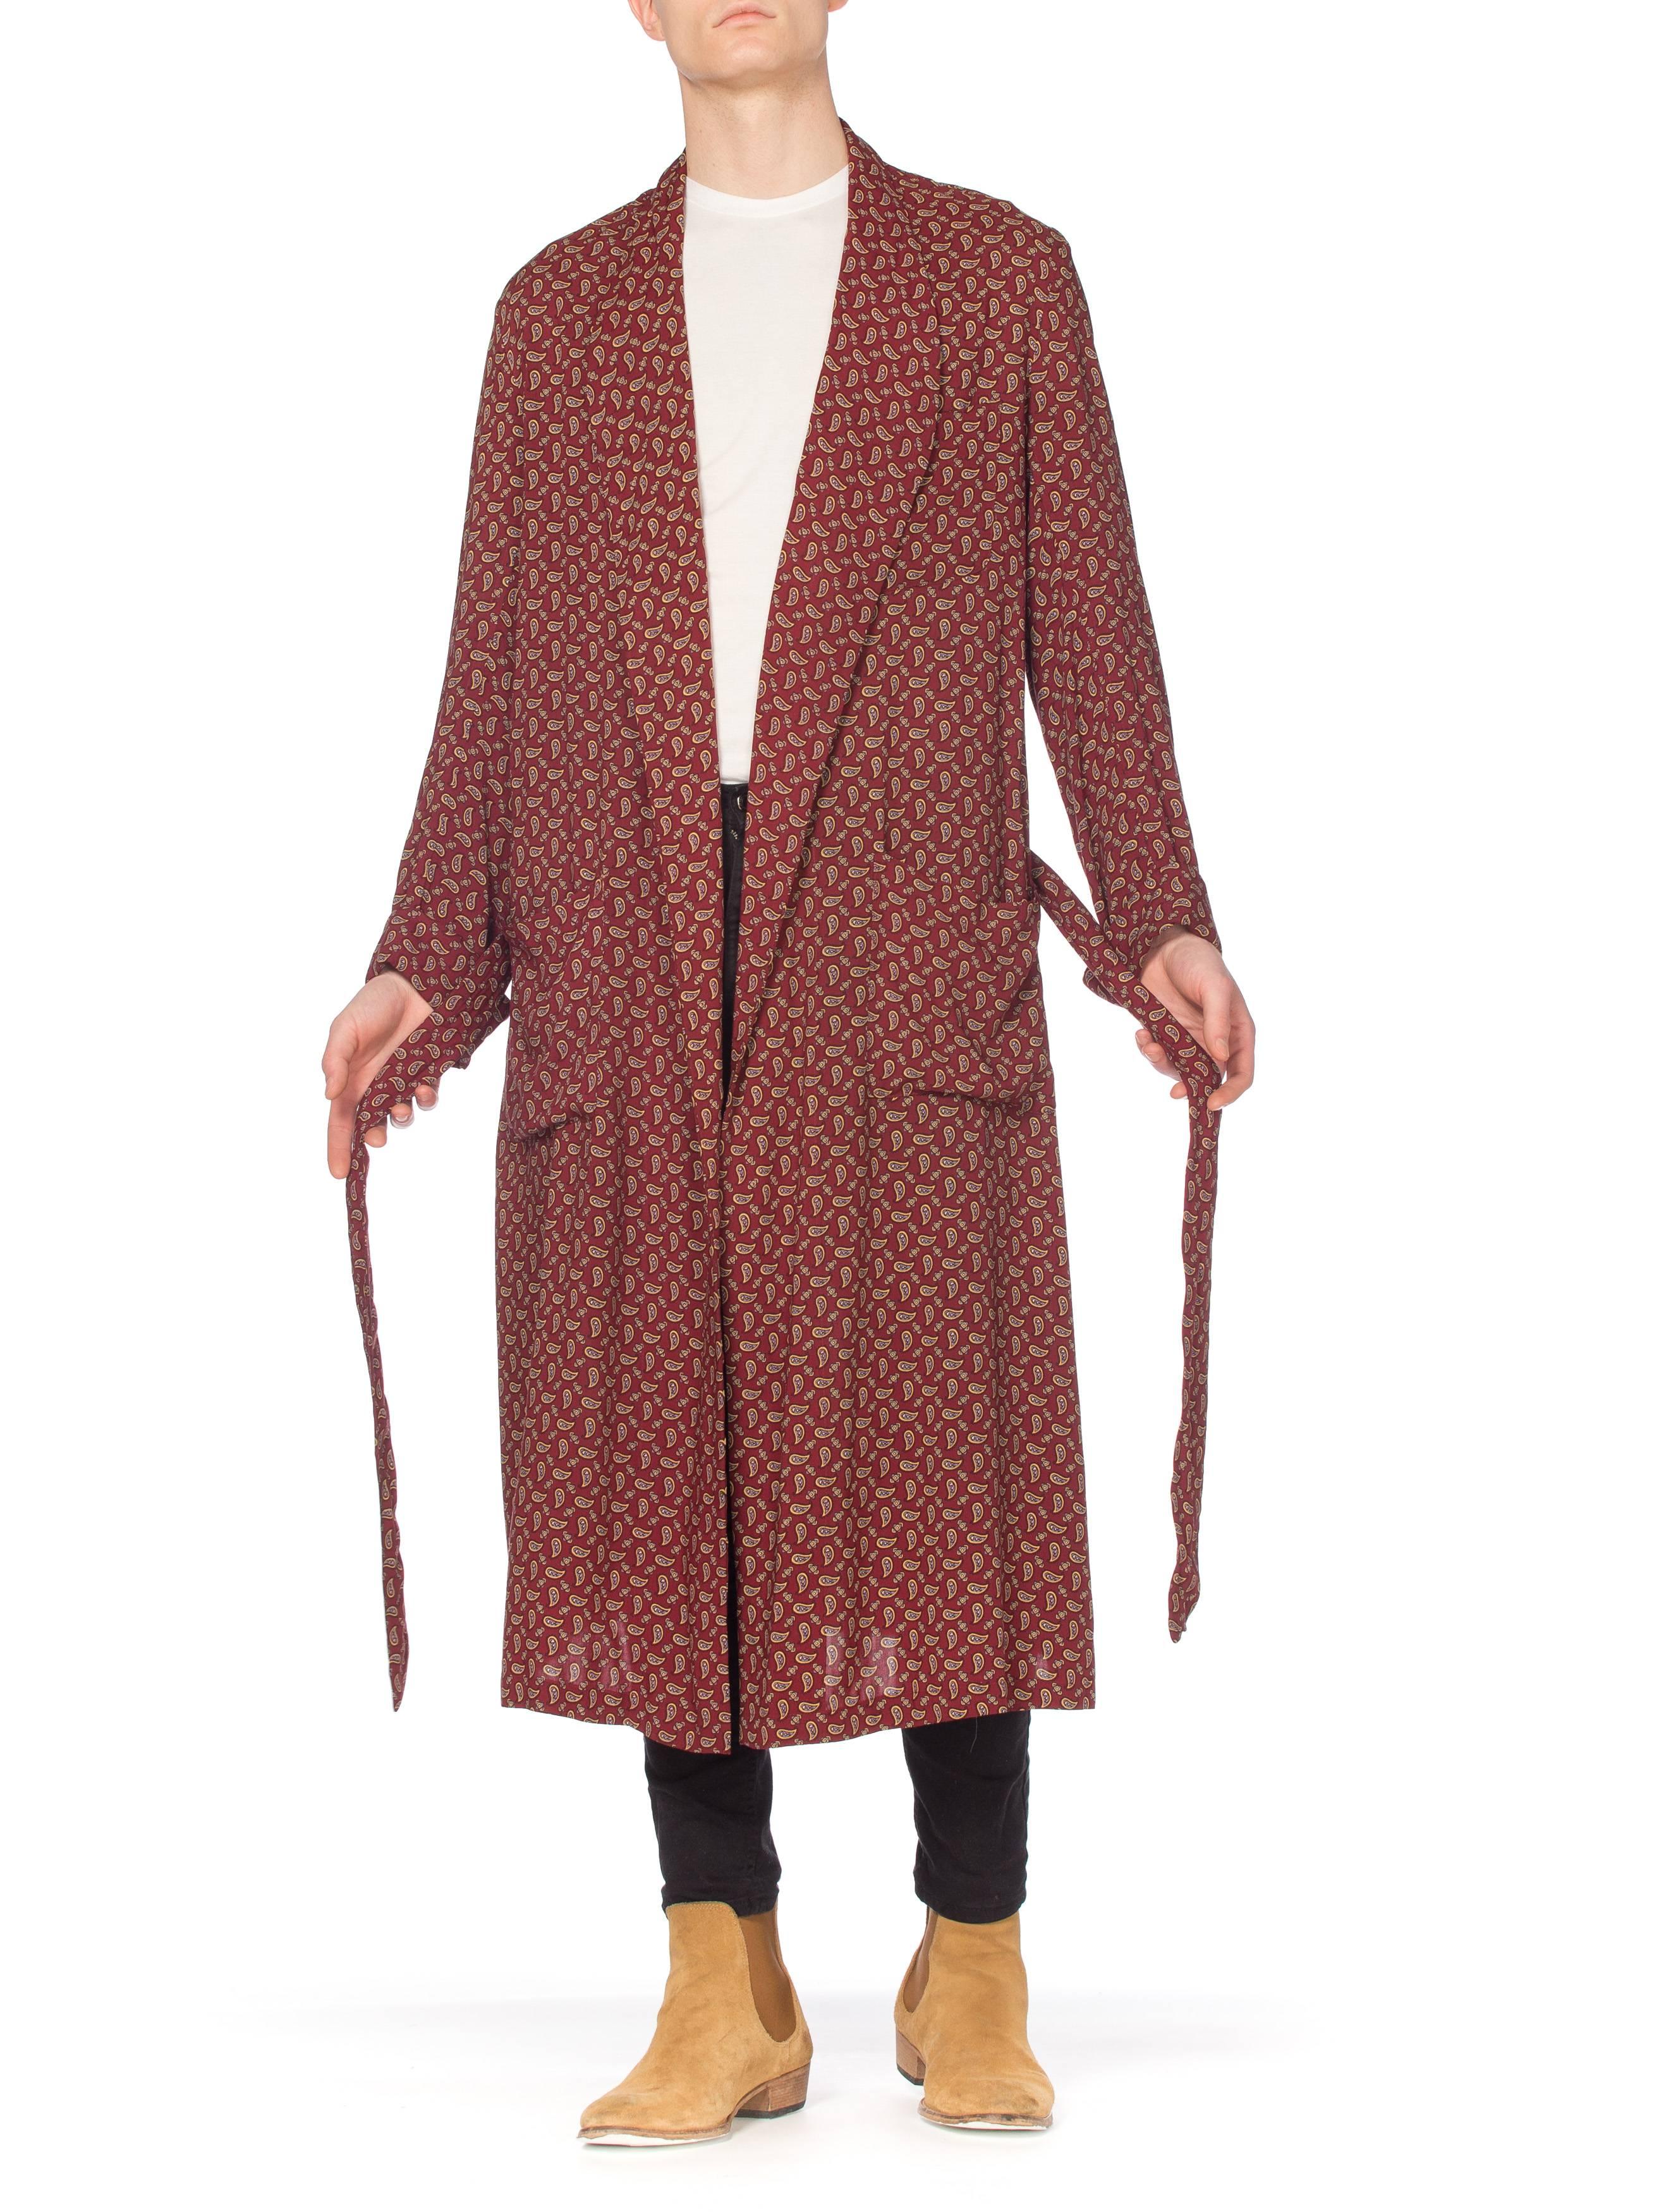 Men's 1950S Burgundy Paisley Rayon Robe Made In England For Sale